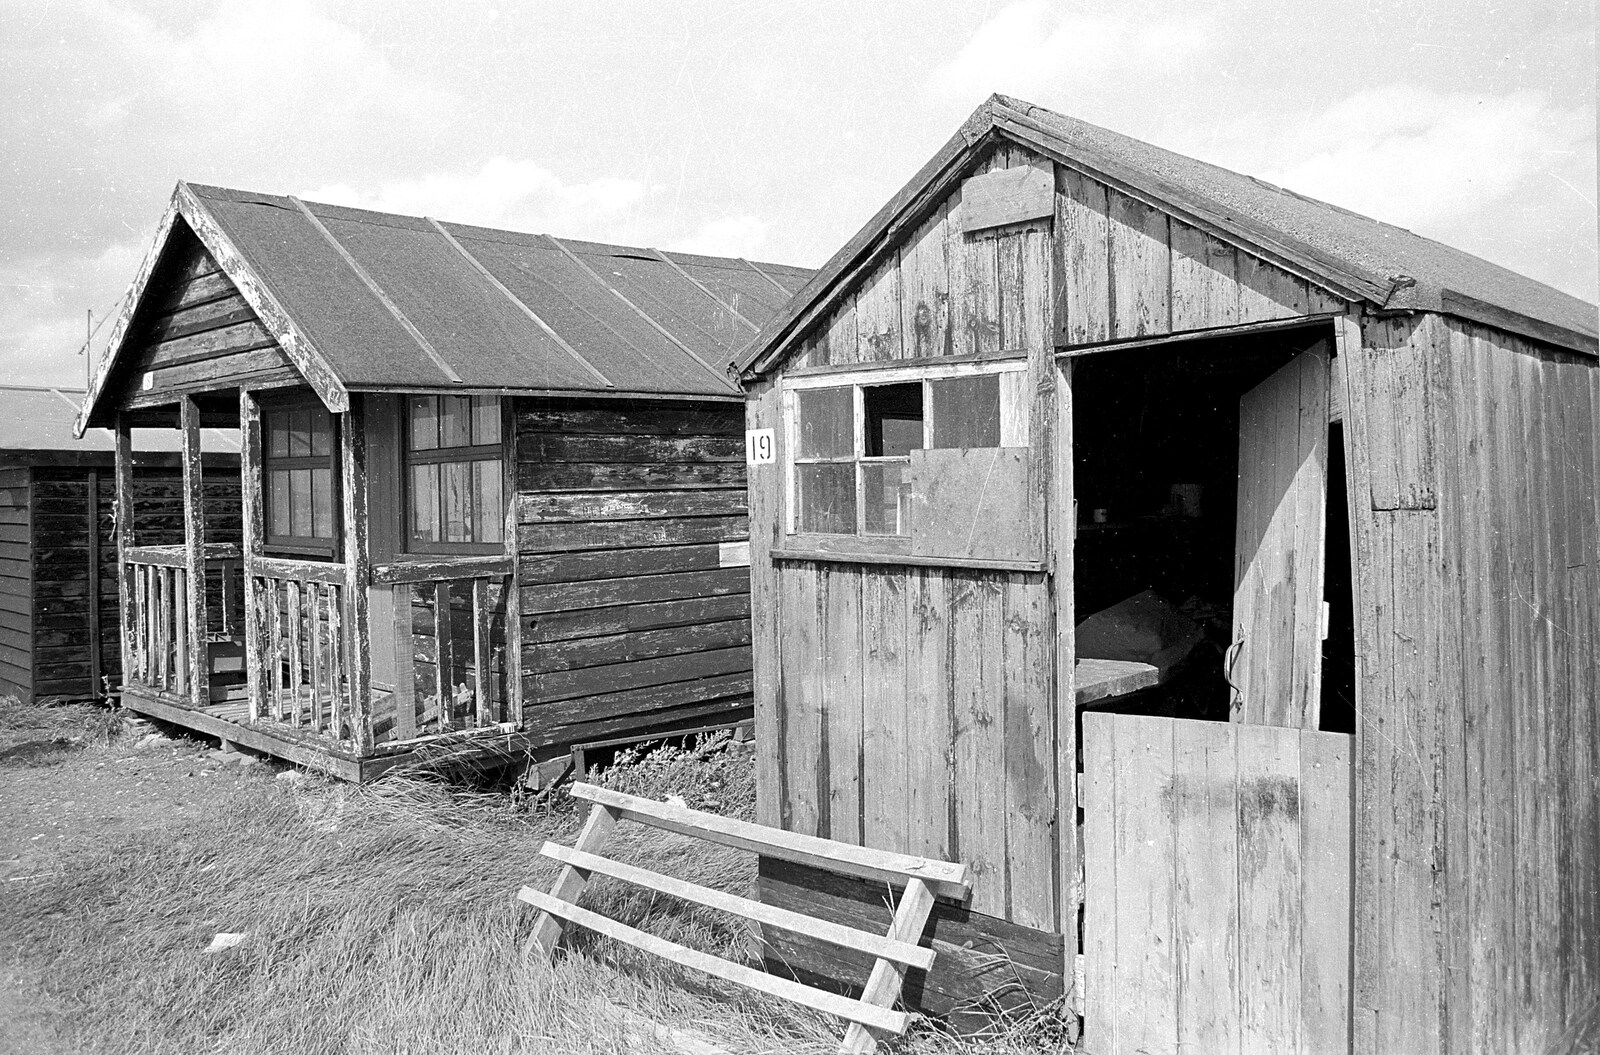 Derelict huts on Blackshore Quay from Blackshore Quay in Black and White, Southwold and Sizewell, Suffolk - 16th September 1992